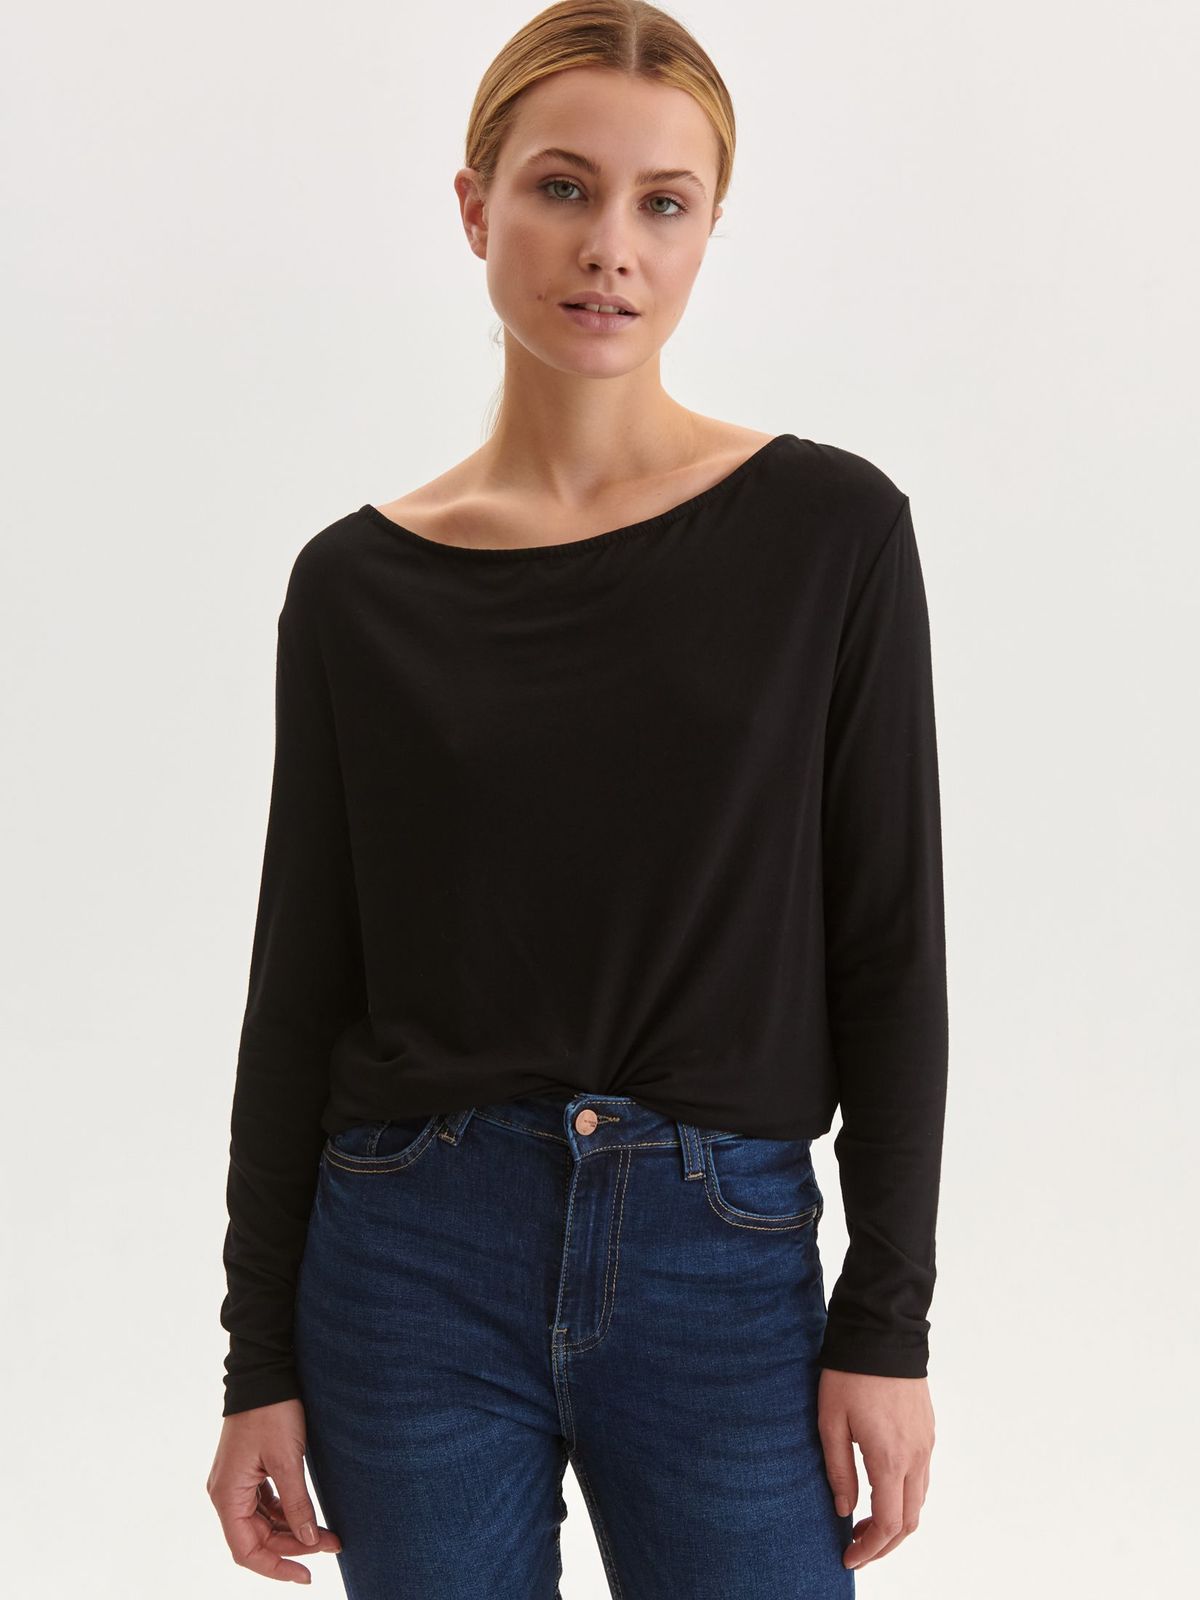 Black women`s blouse knitted loose fit with large collar